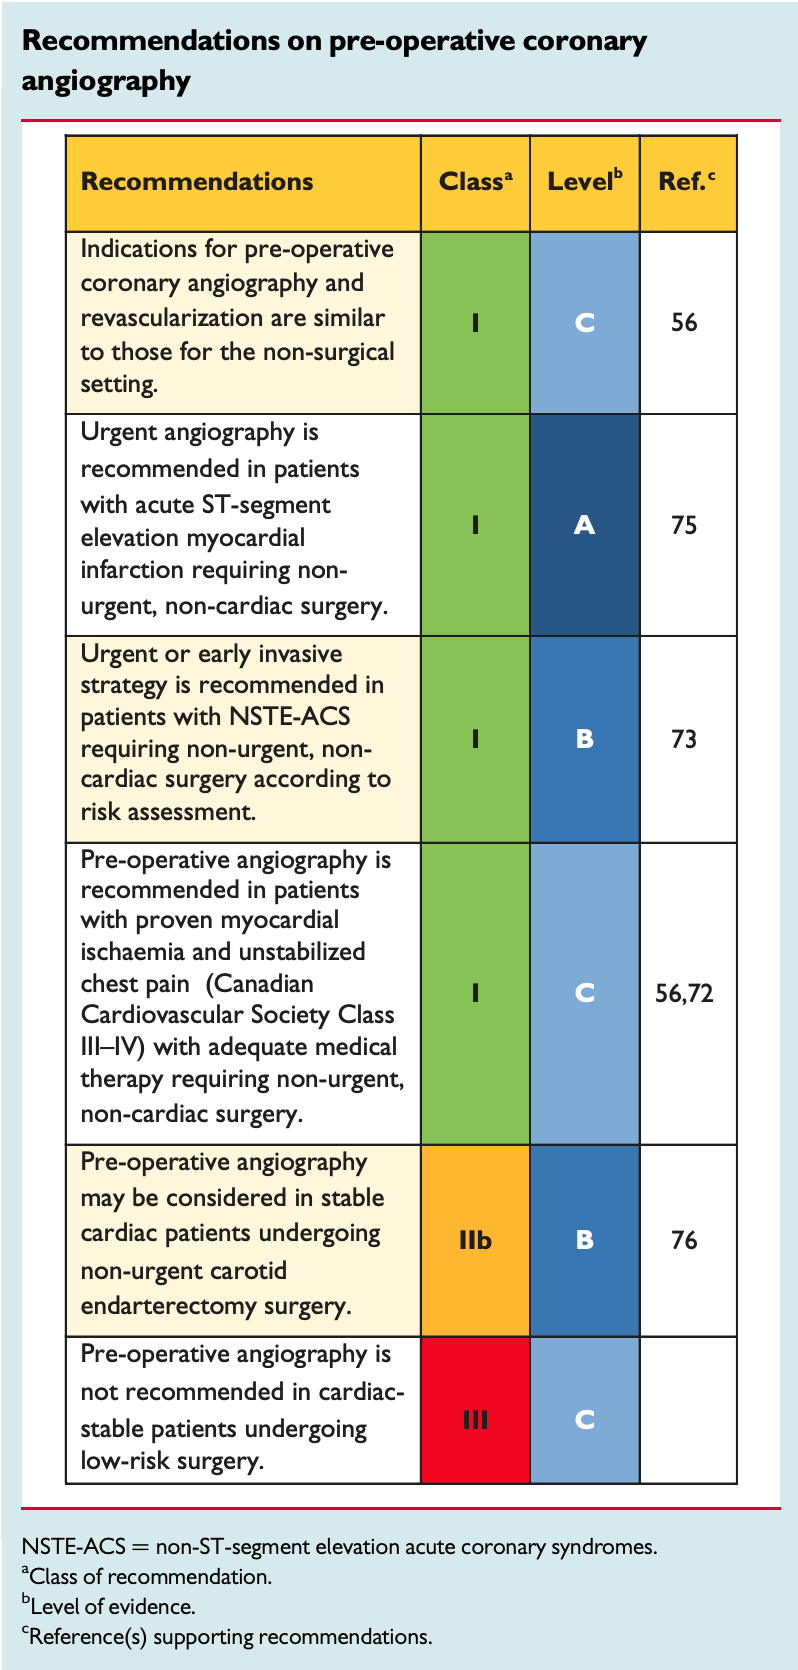 Recommendations on pre-operative coronary angiography